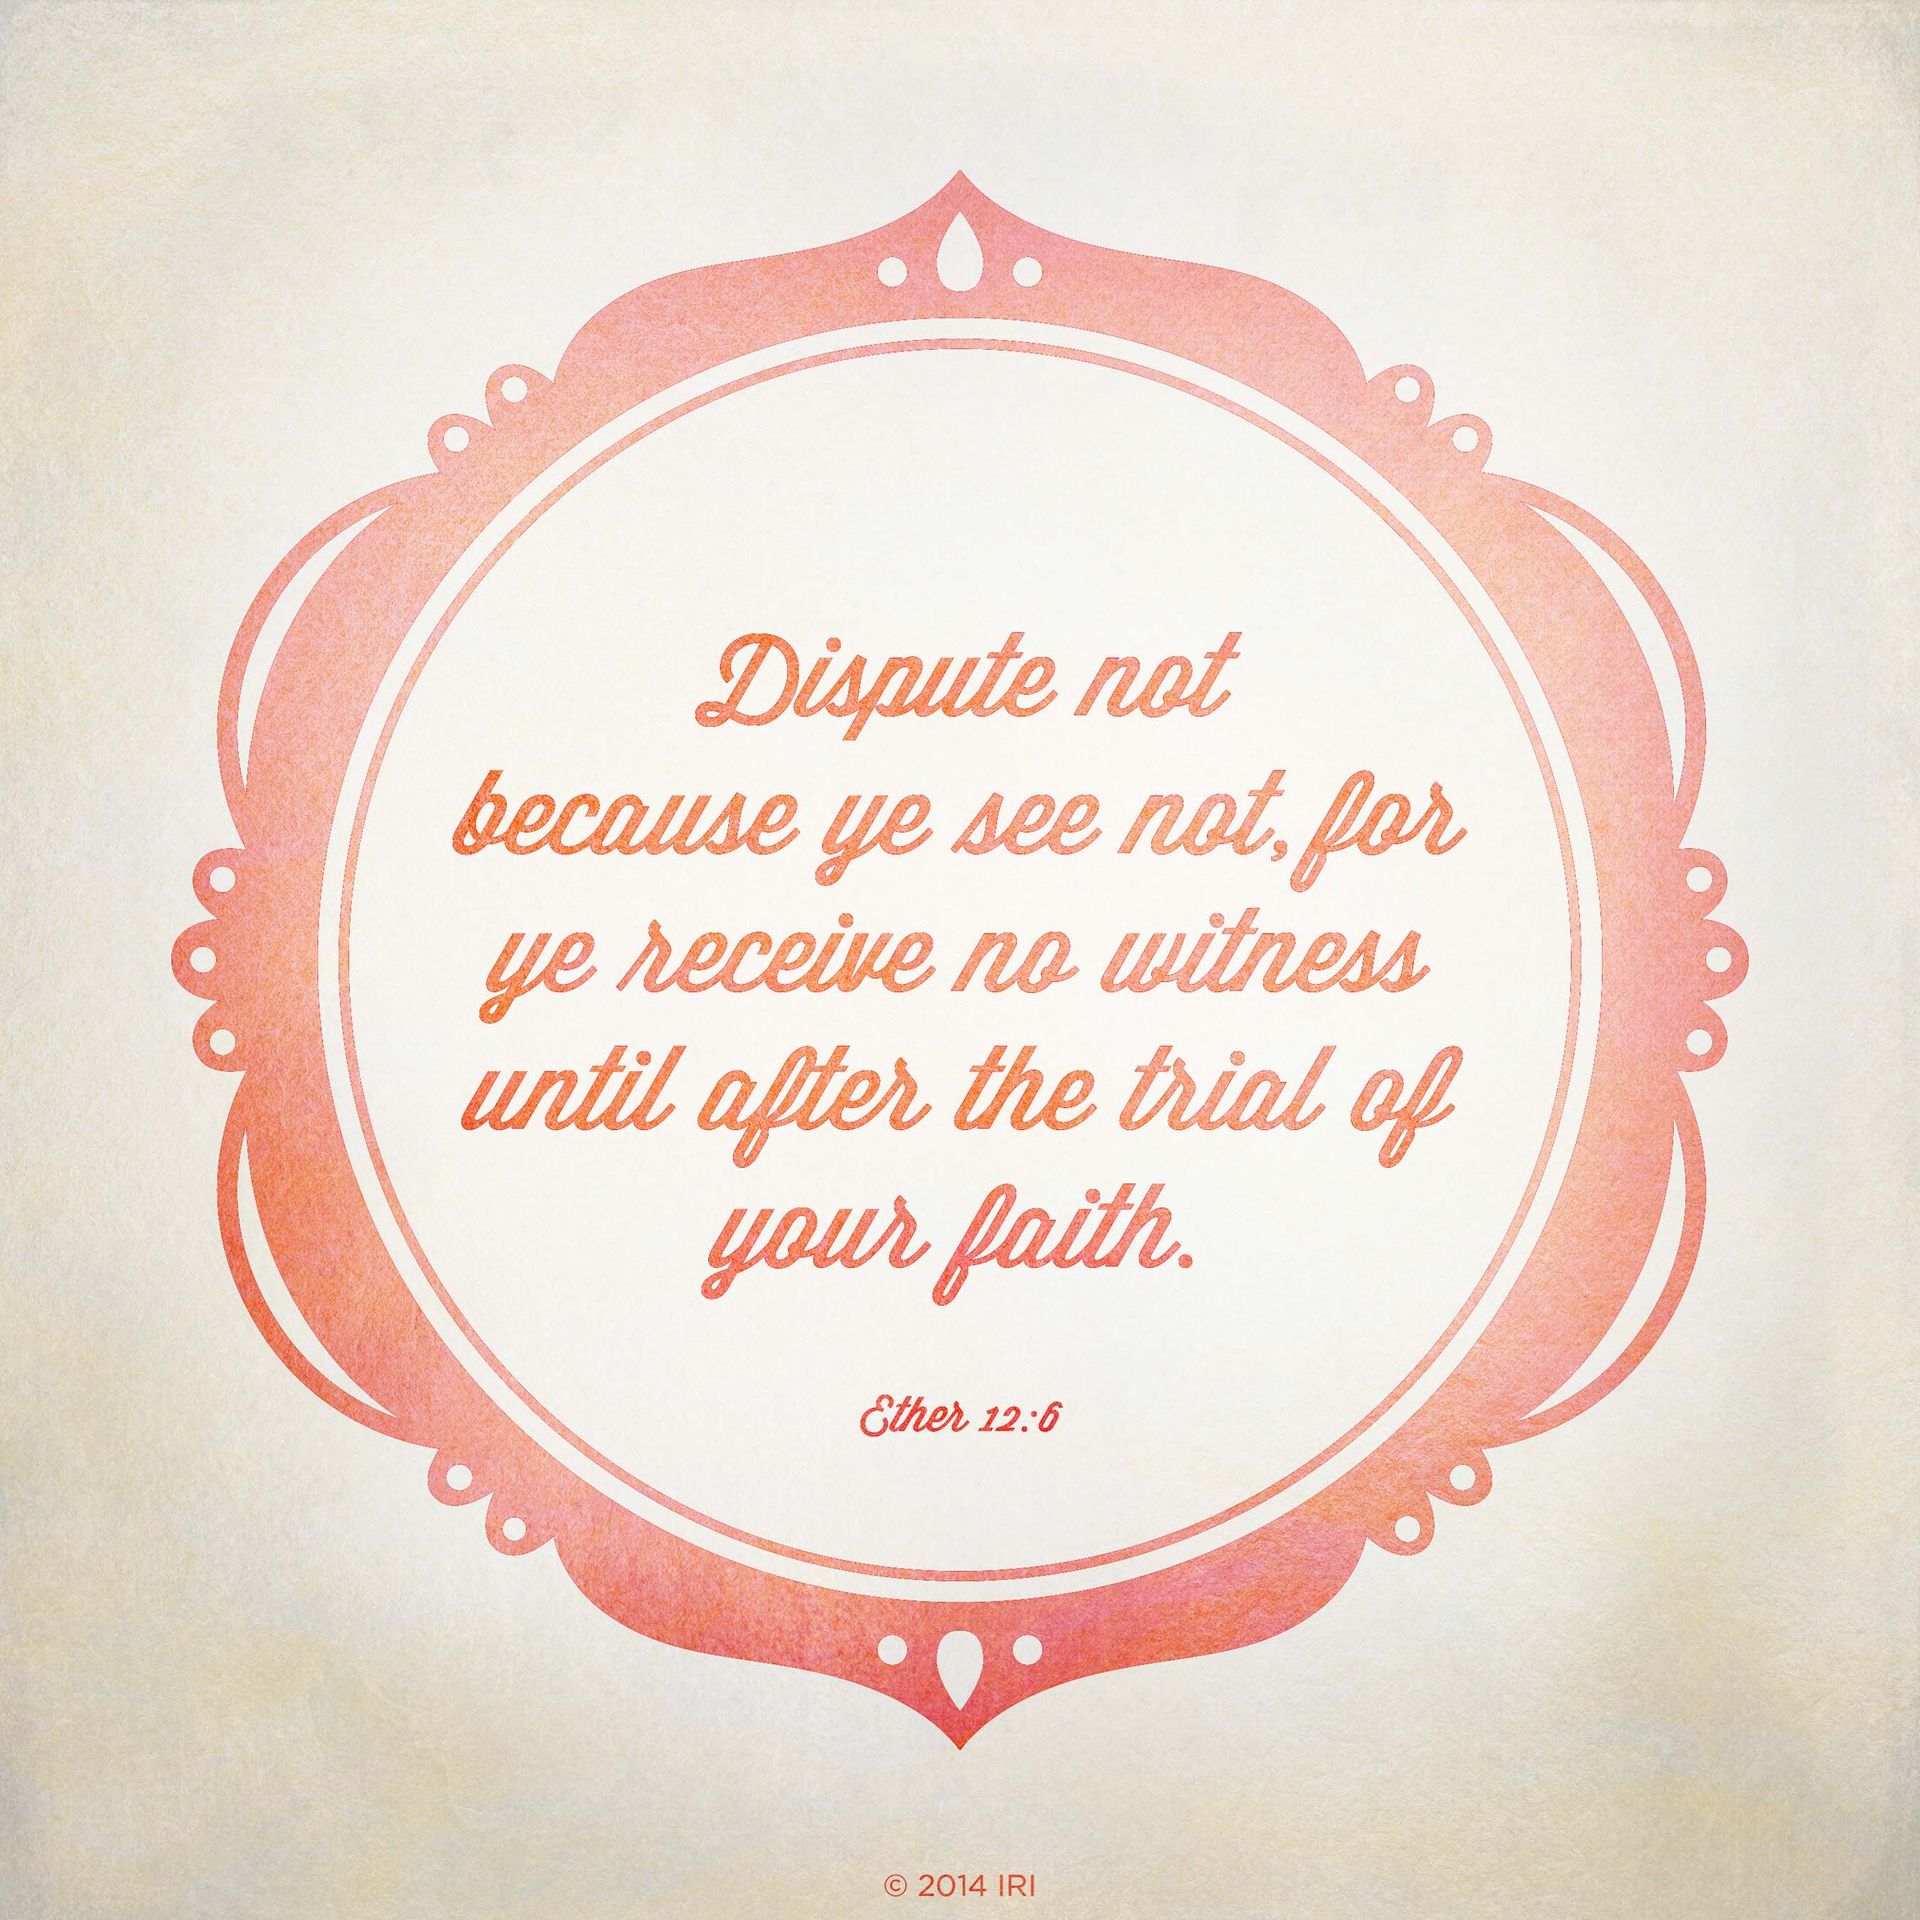 “Dispute not because ye see not, for ye receive no witness until after the trial of your faith.”—Ether 12:6